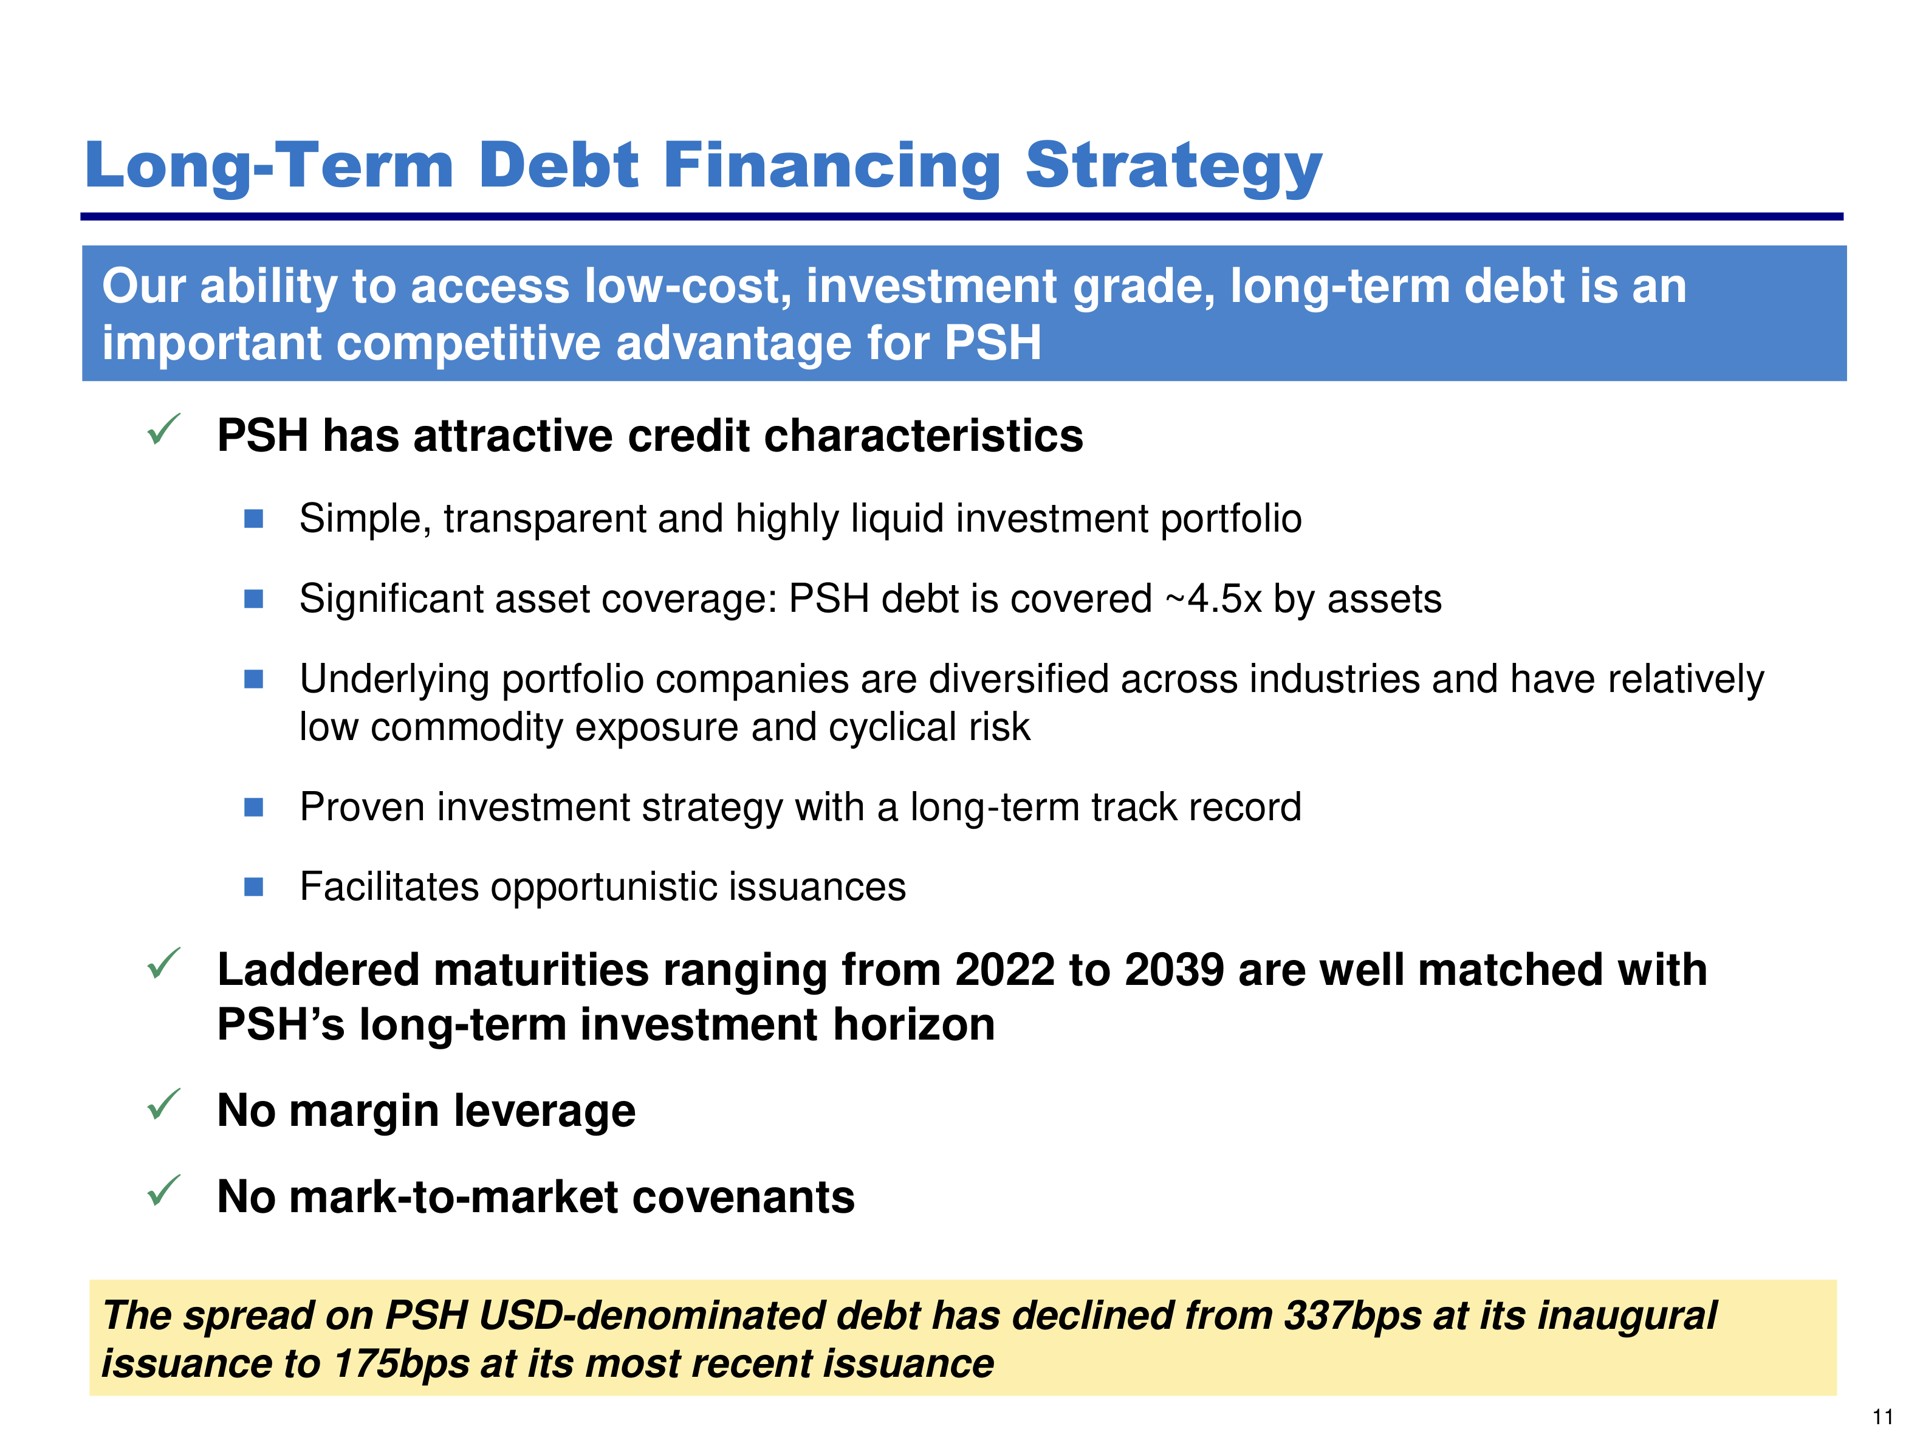 long term debt financing strategy our ability to access low cost investment grade long term debt is an important competitive advantage for has attractive credit characteristics laddered maturities ranging from are well matched with no margin leverage | Pershing Square